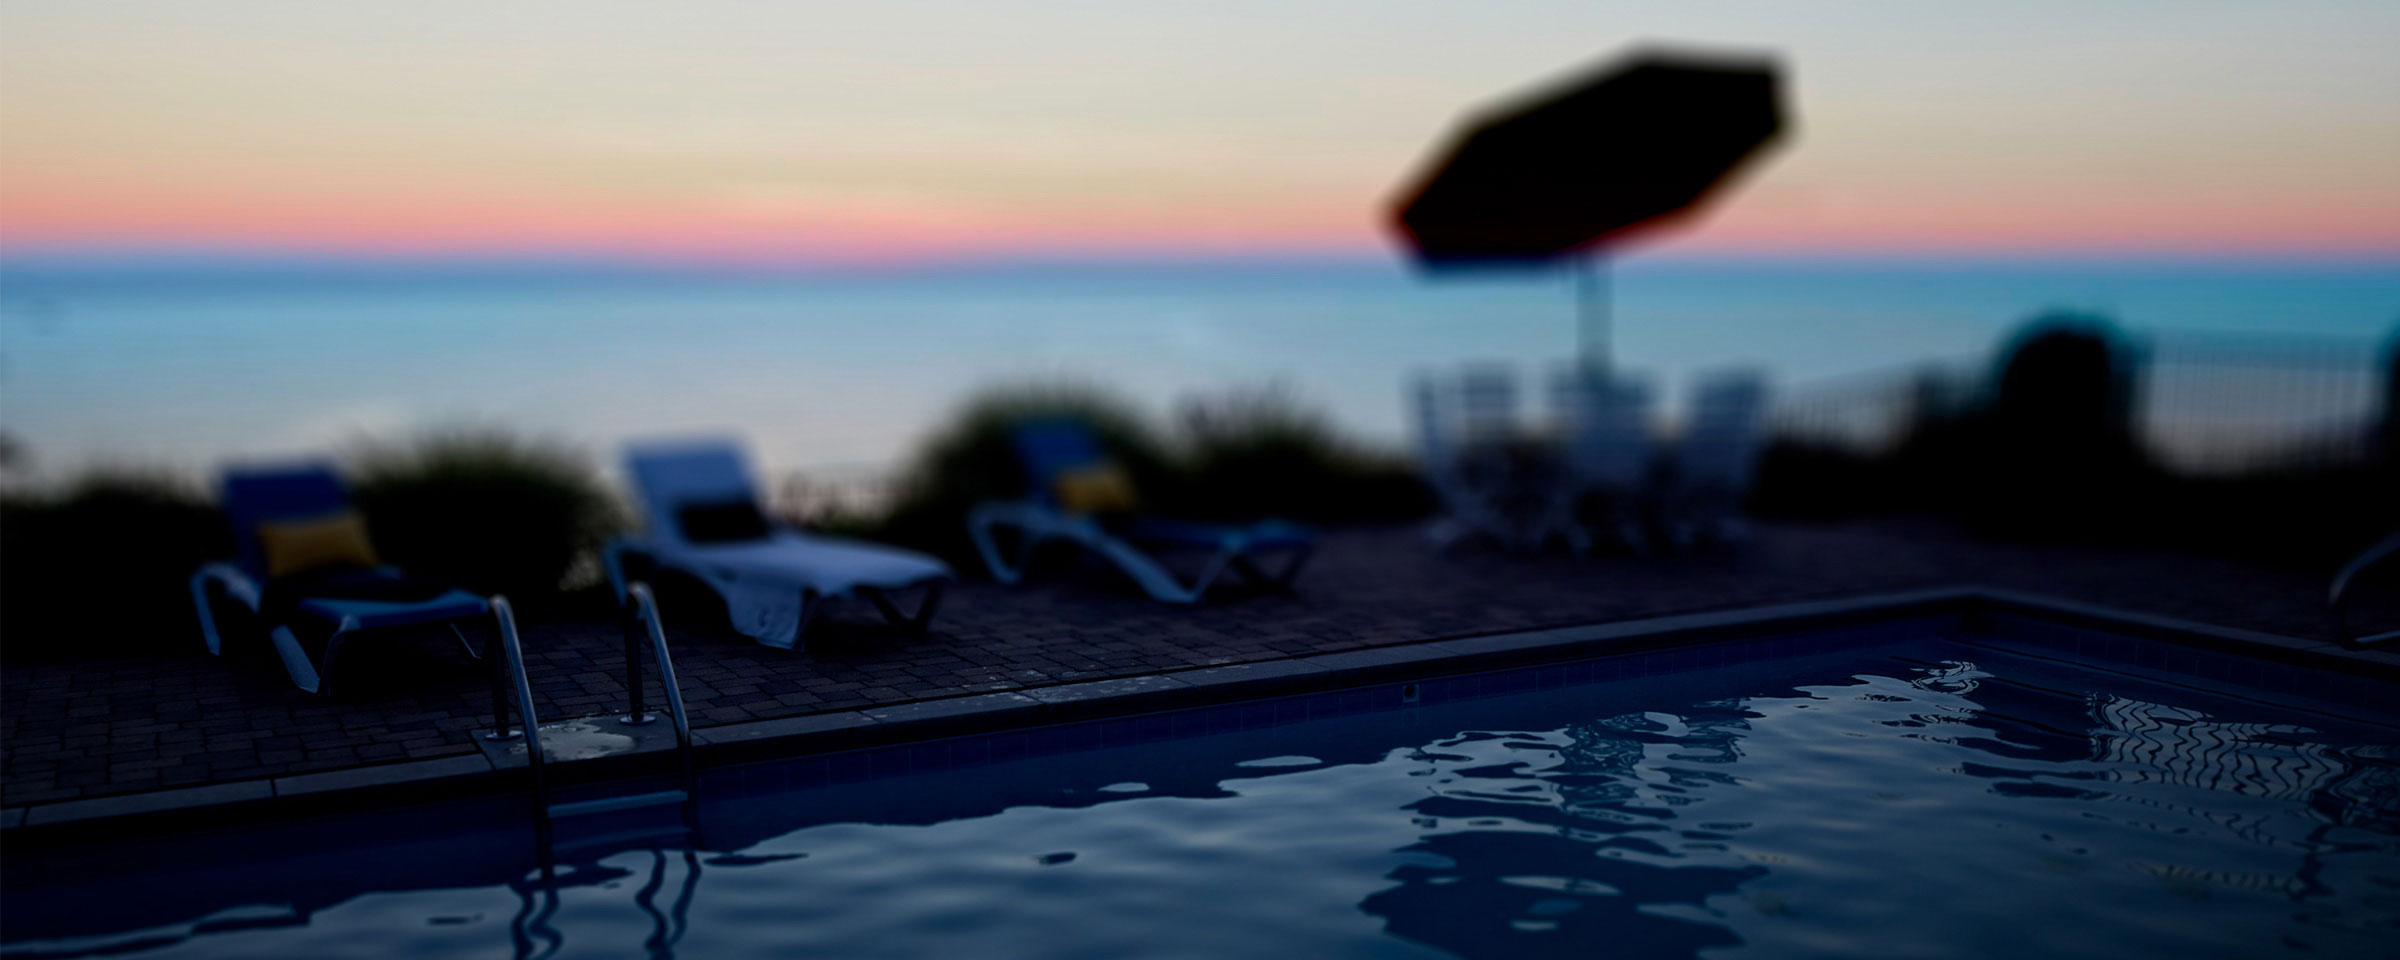 A tranquil poolside scene is shown as the background for the PoolIQ sales app created by Blue Flame Thinking for Pentair.